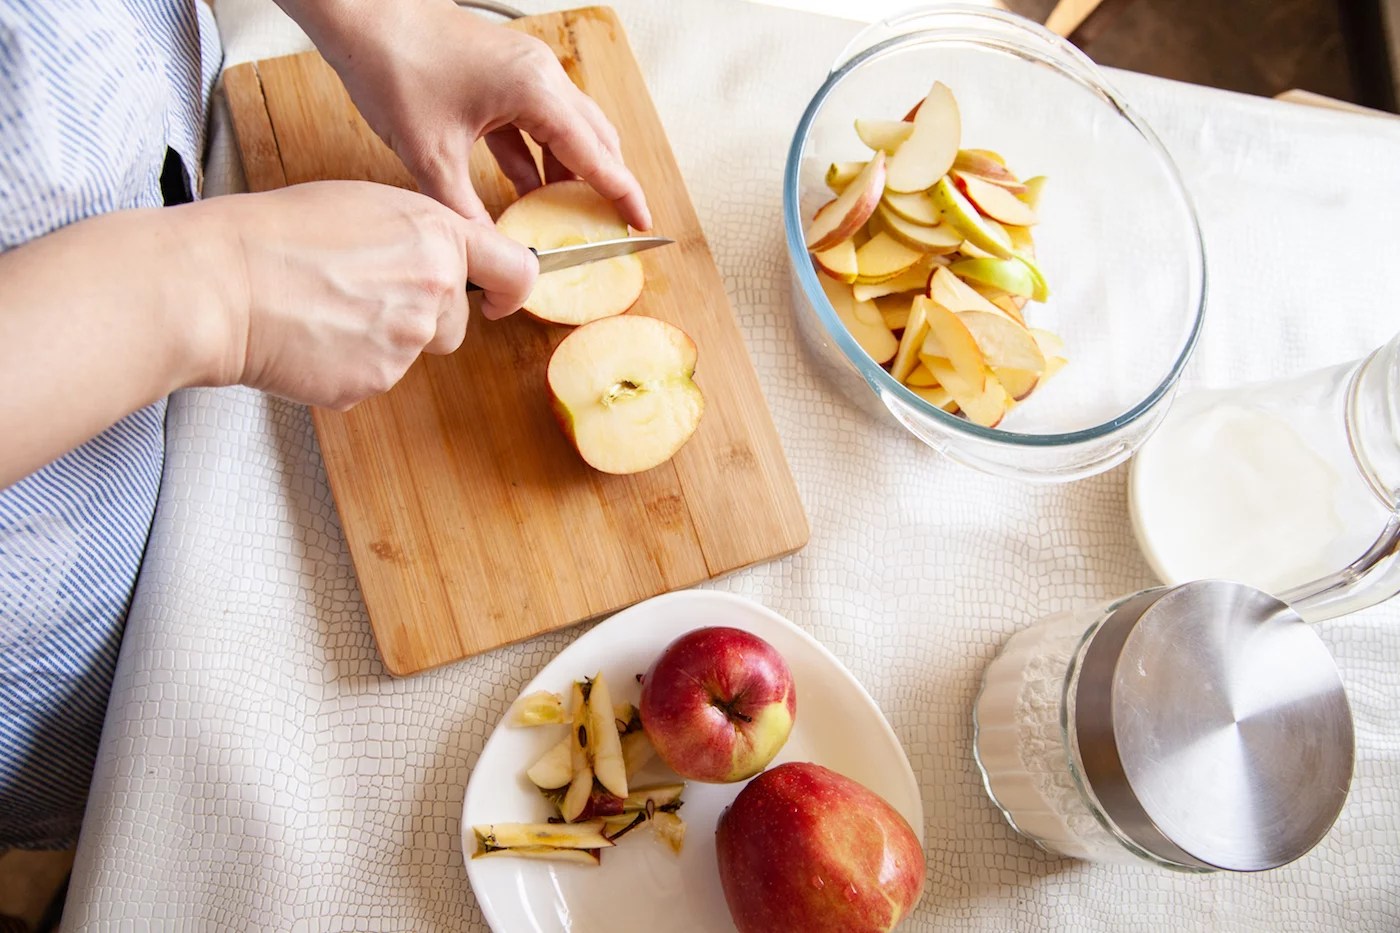 Woman slicing up Honeycrisps, one of the best apples for cooking, on a cutting board